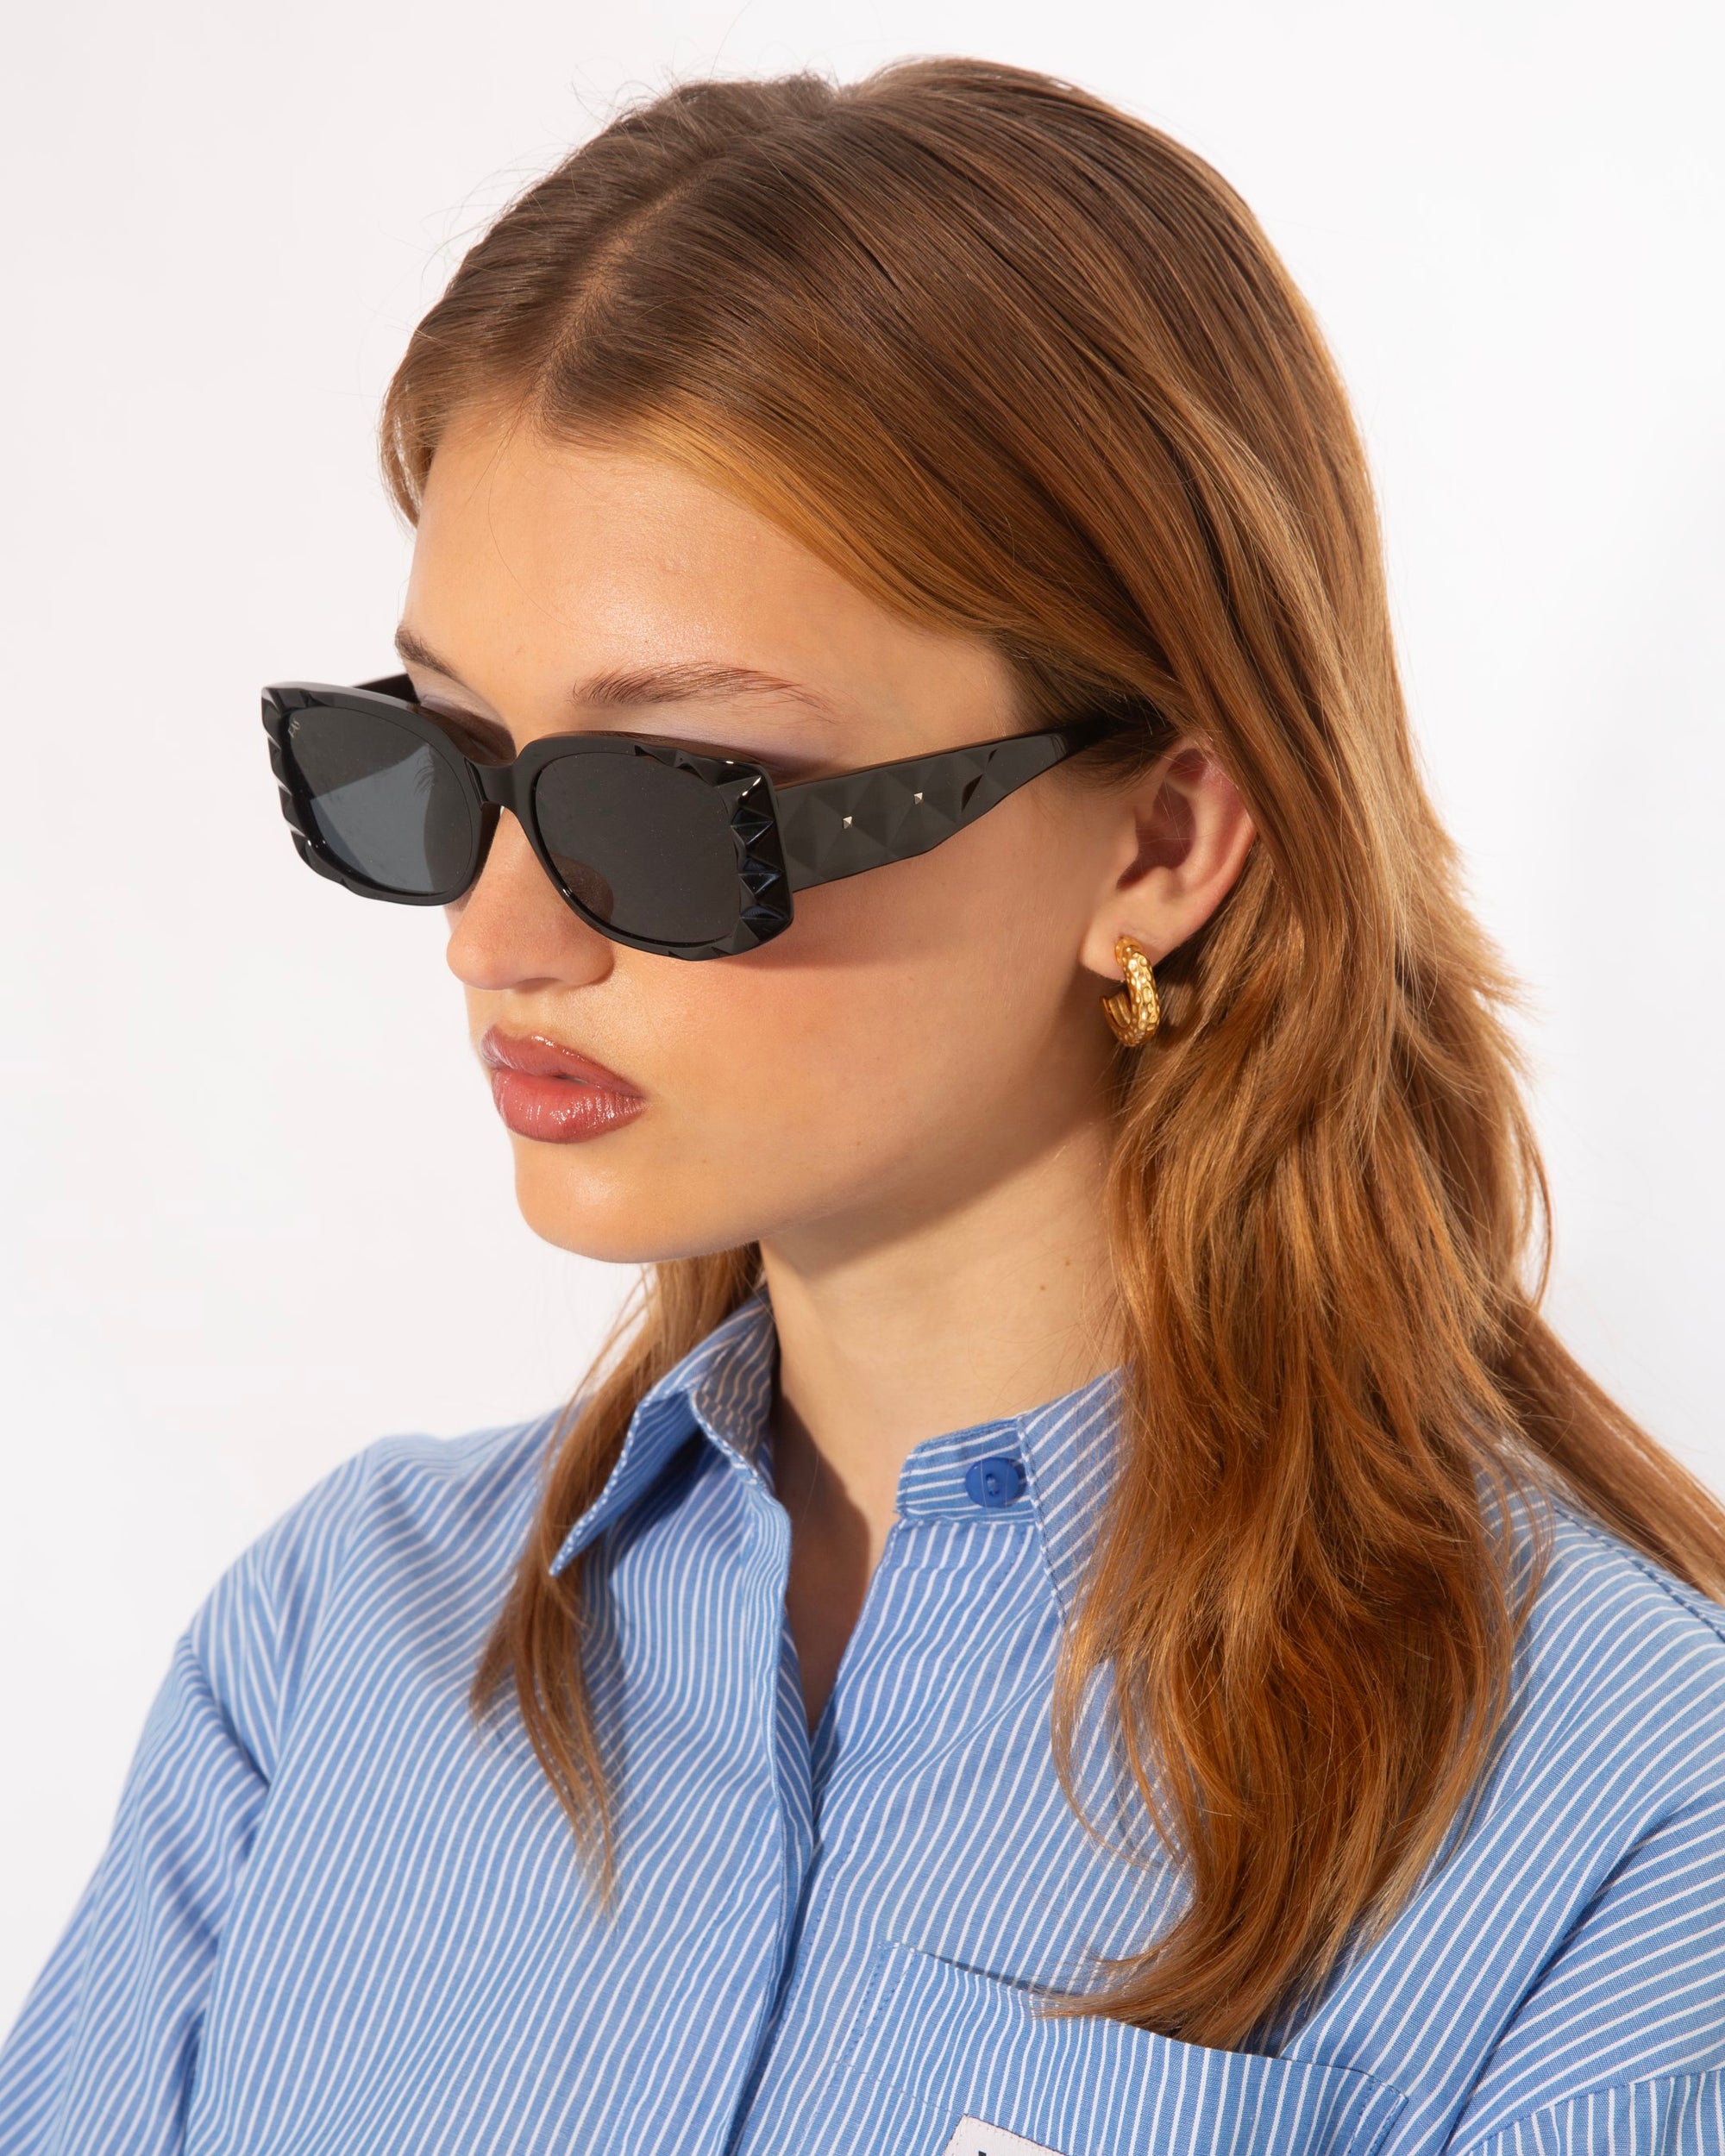 A person with light brown hair wearing black rectangular For Art's Sake® Cushion sunglasses with Ultra-lightweight Nylon lenses, a blue and white striped button-up shirt, and gold hoop earrings stands in front of a plain white background.